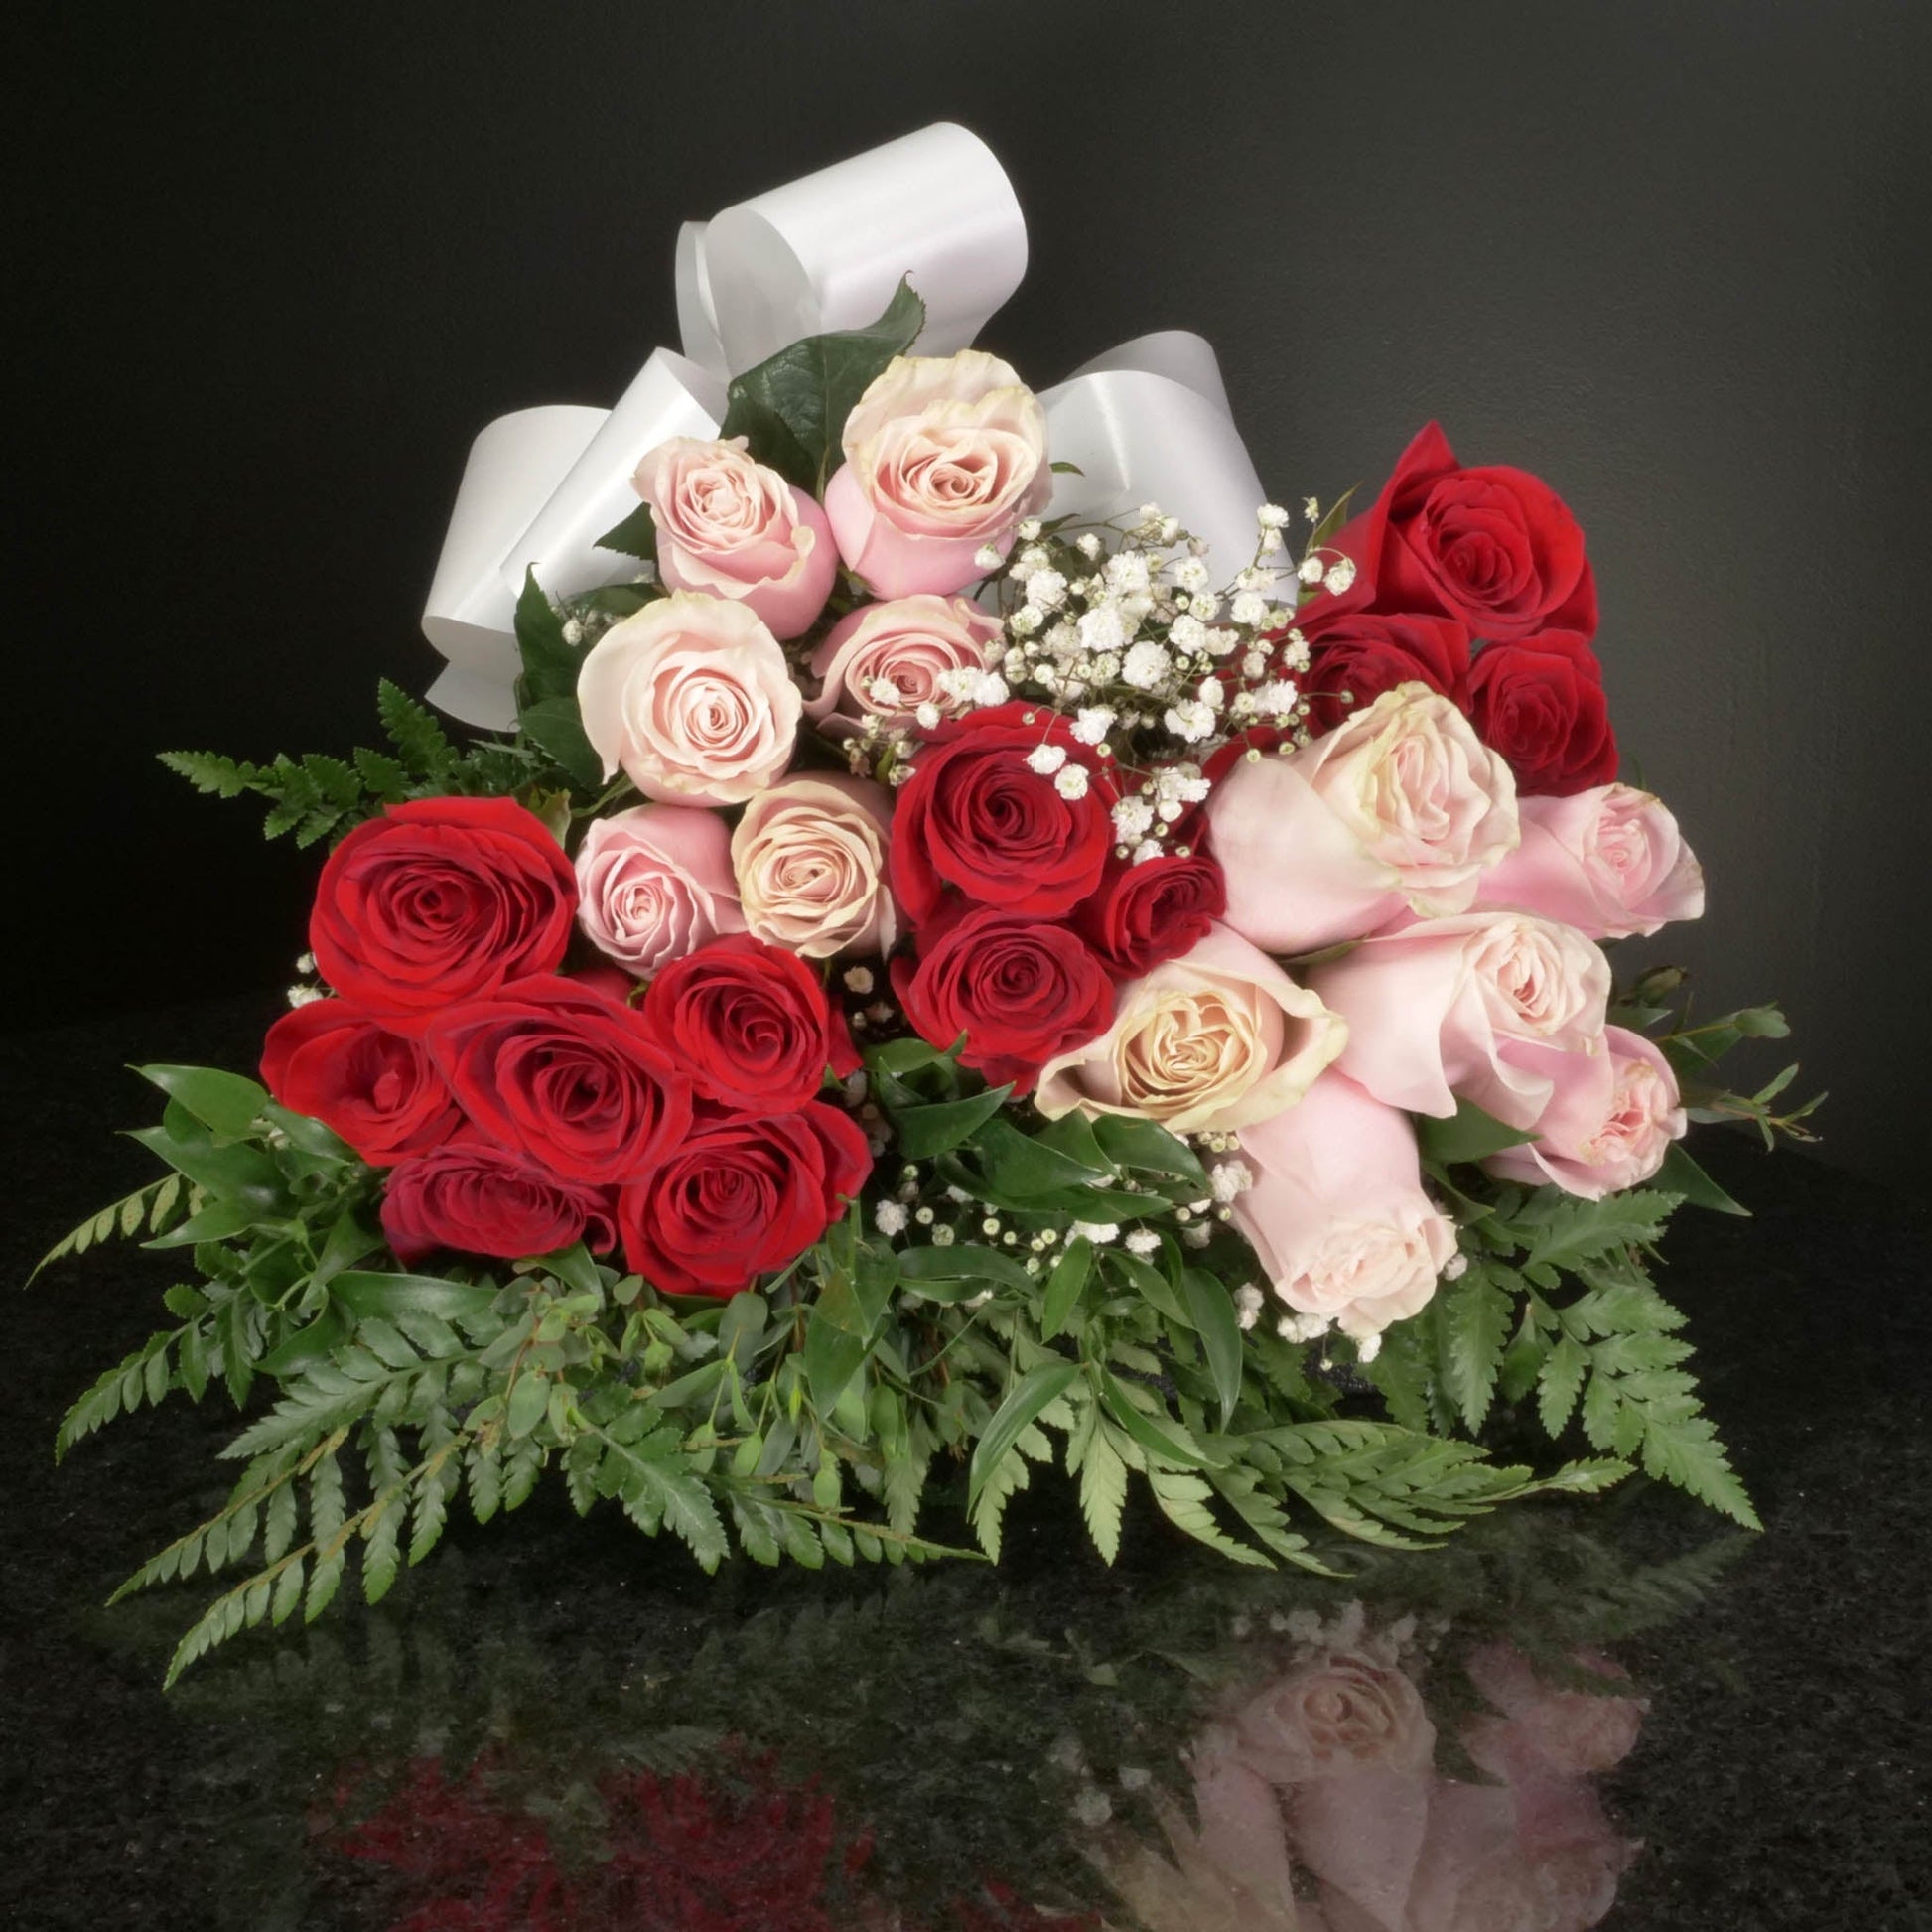  24 Roses / Hand-Tied / Fancy